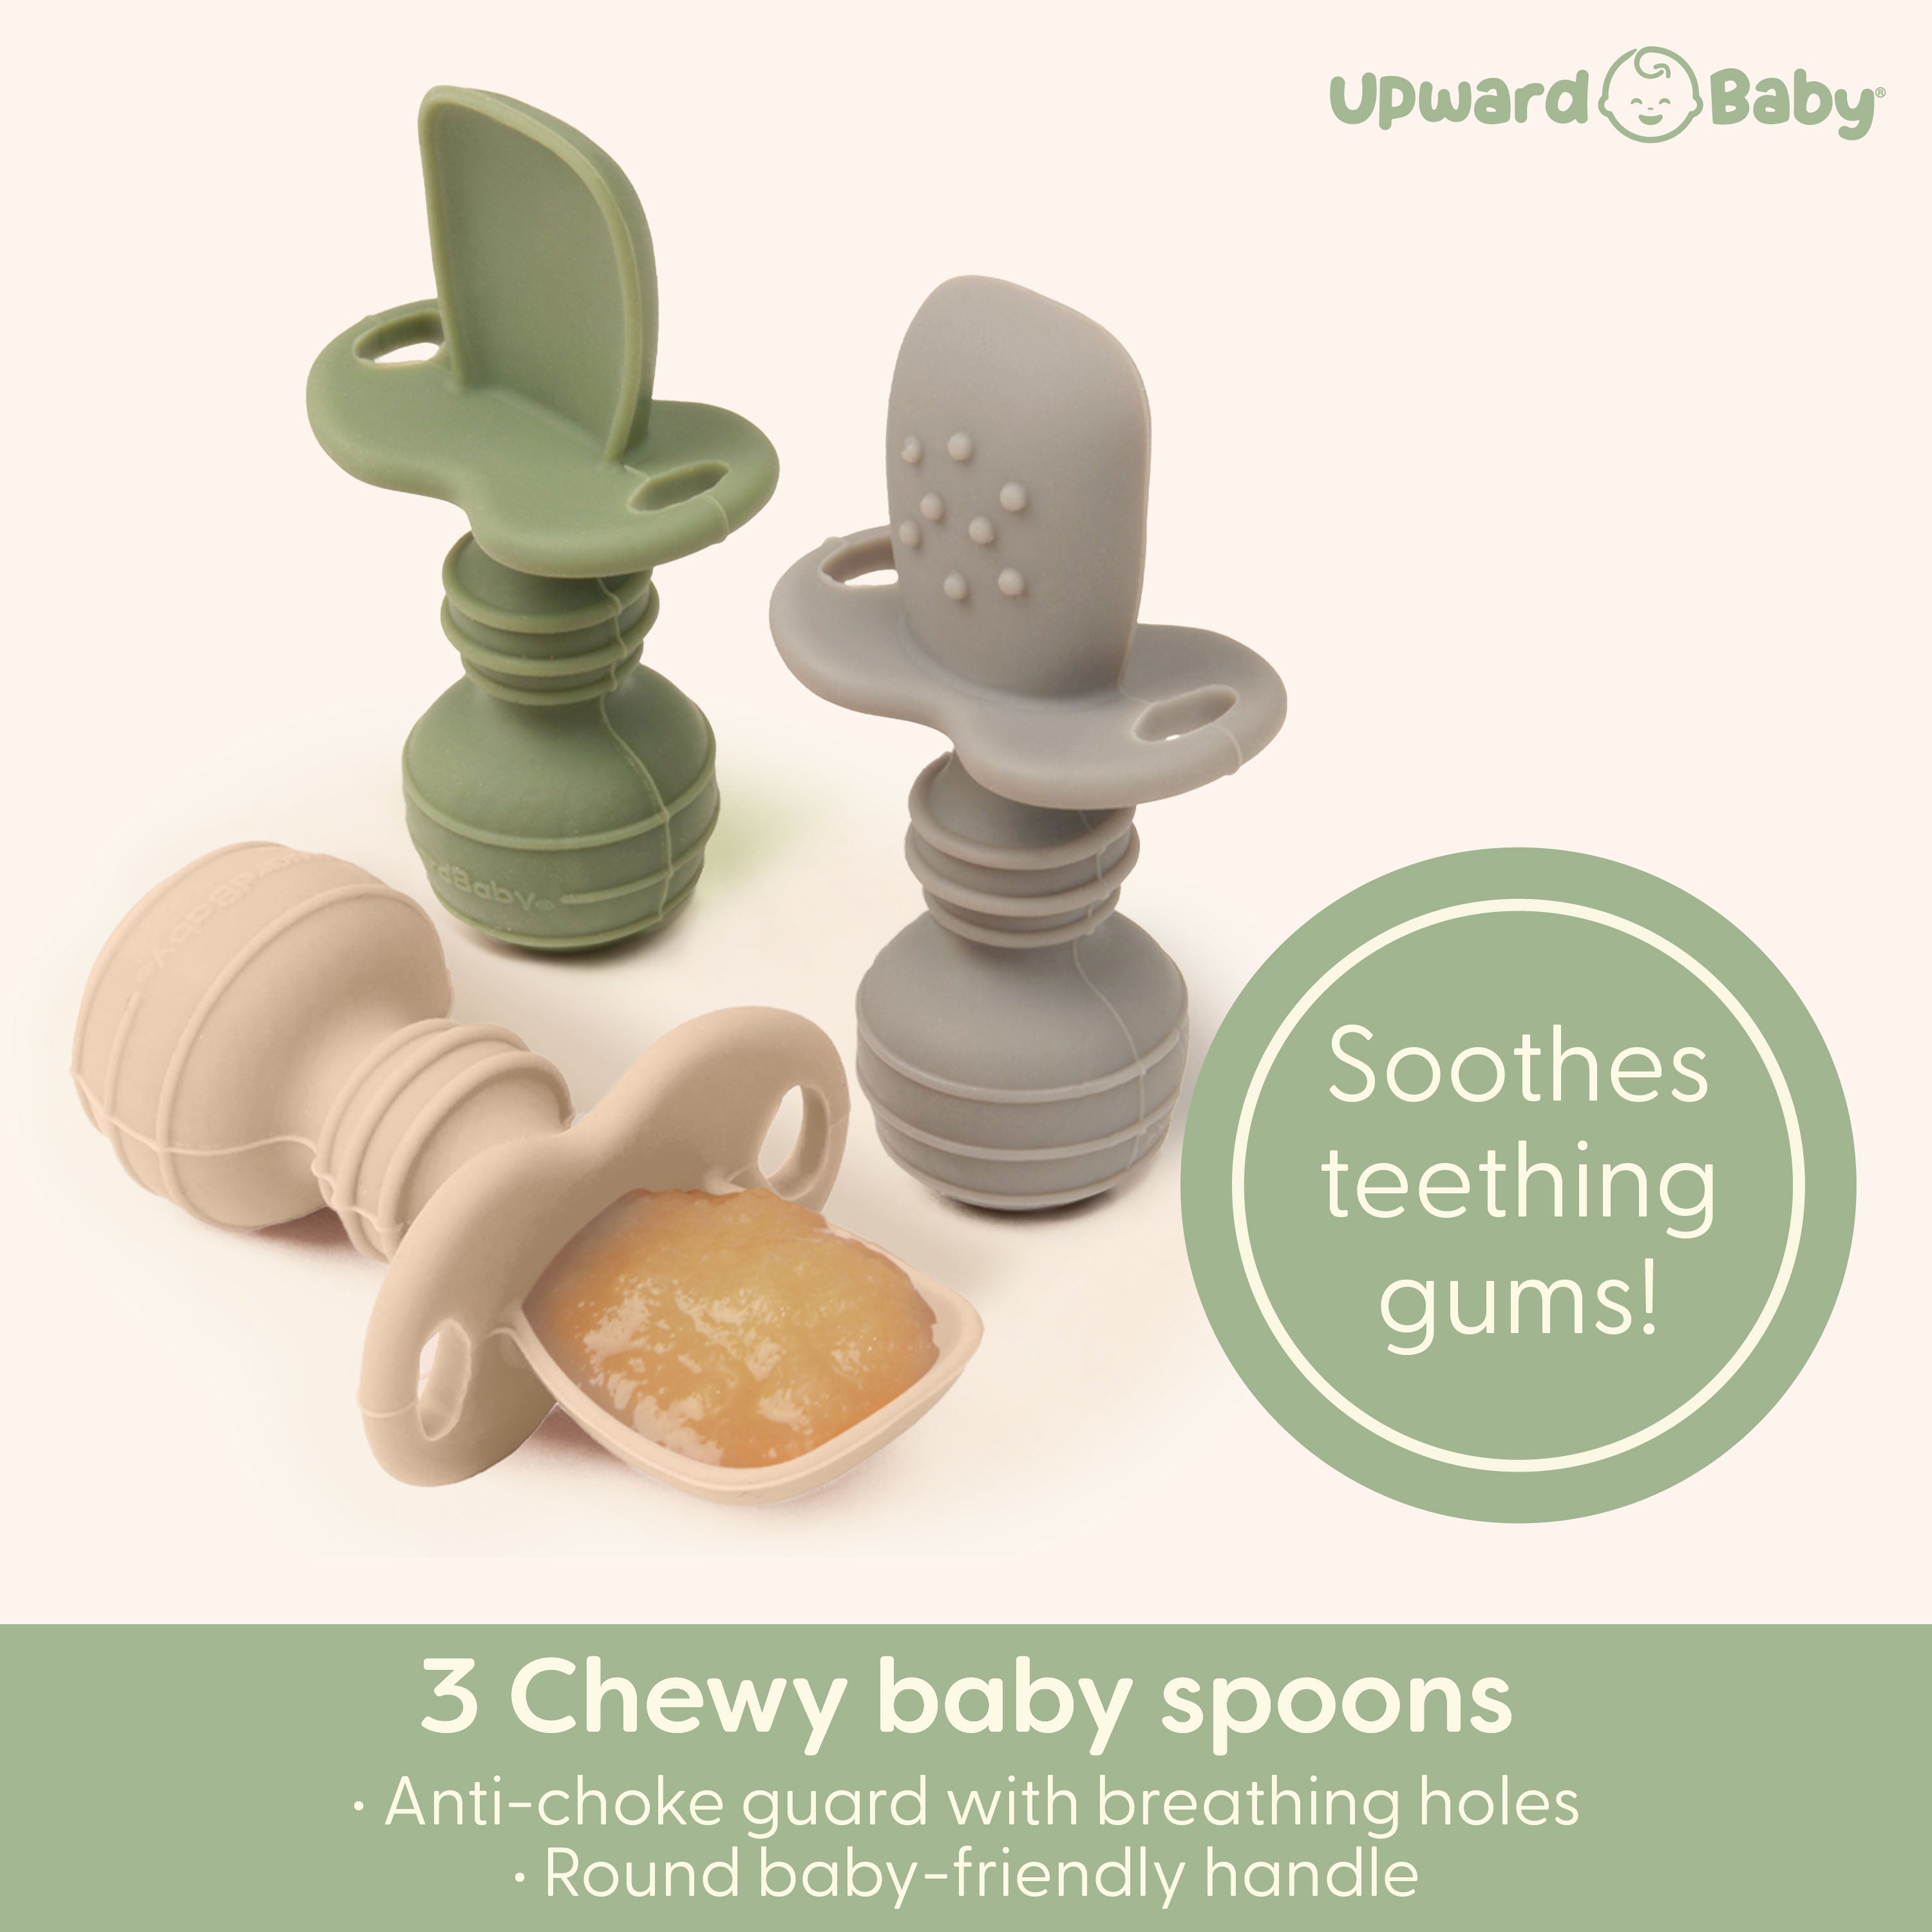 Baby Led Weaning Set With Bibs, Spoons, A Suction Bowl and Suction Placemat Bowl